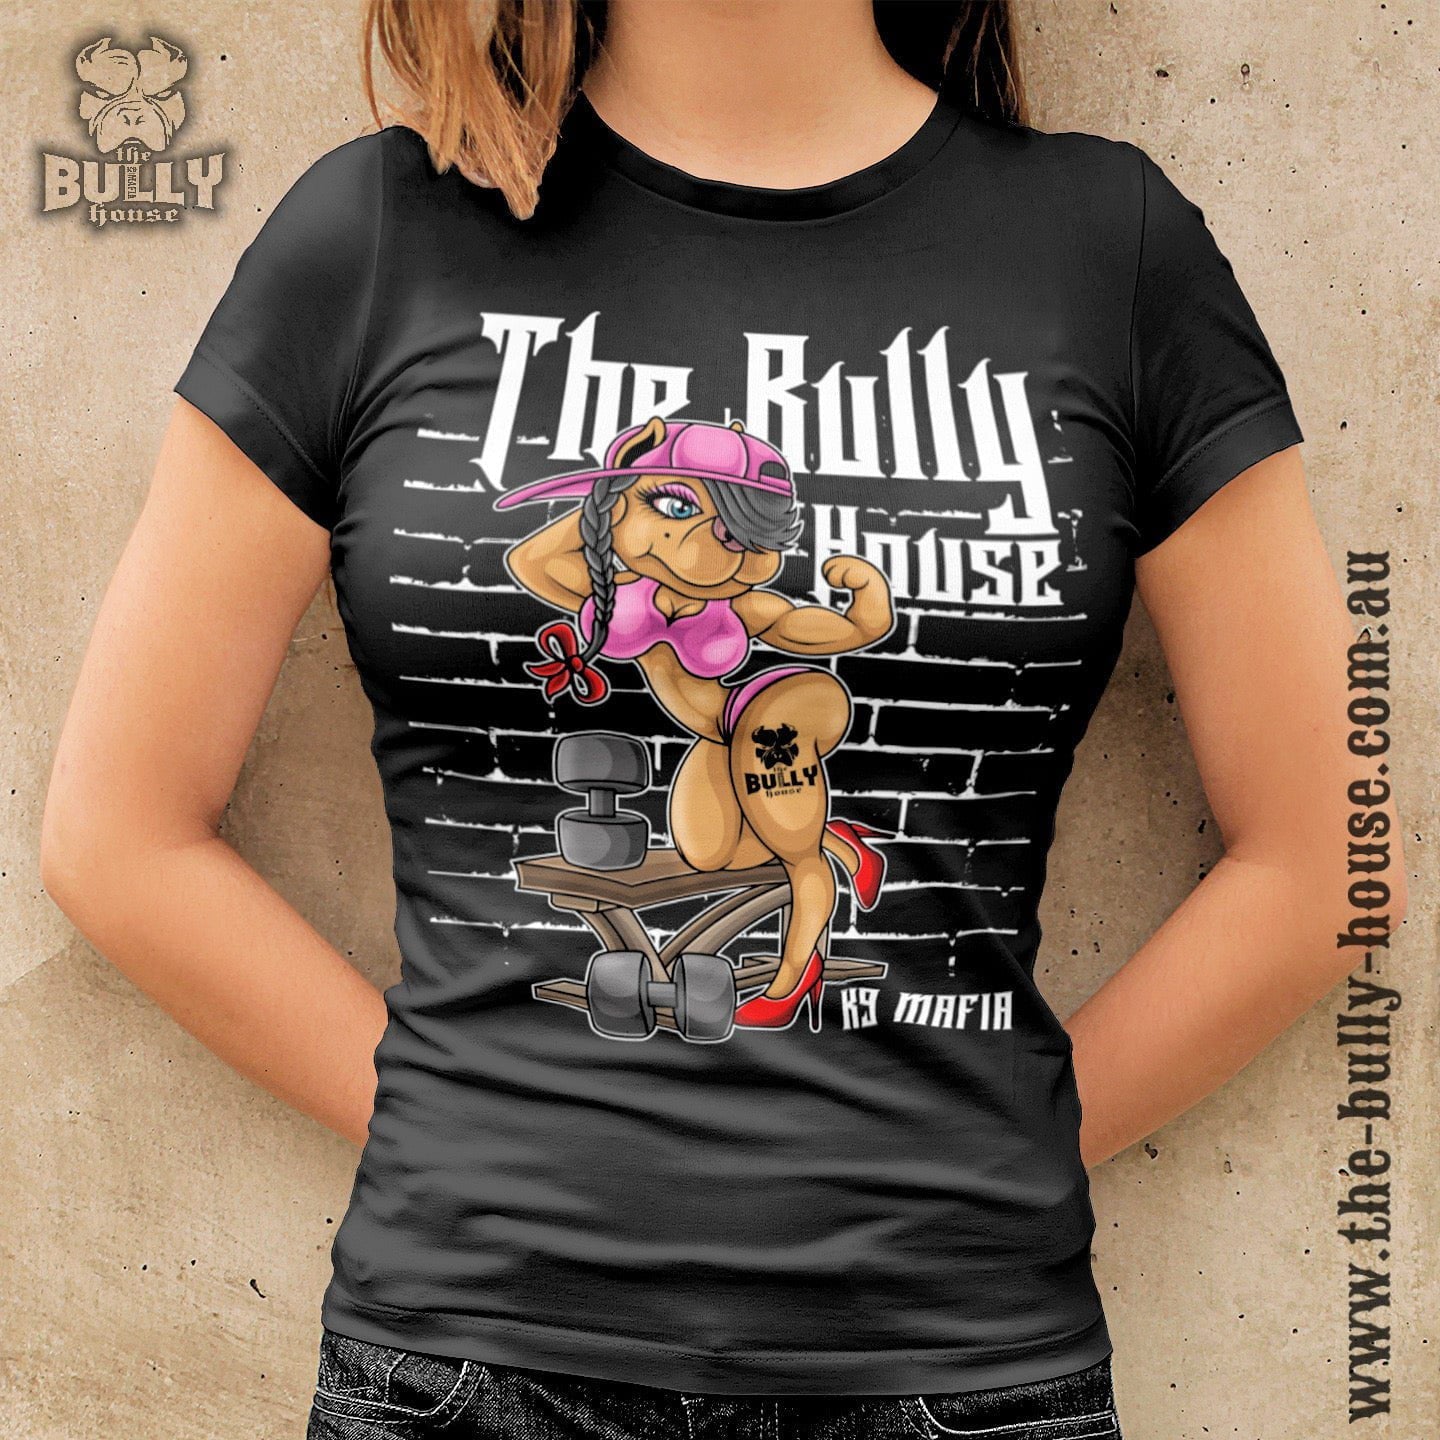 Hustle for the Muscle - T Shirt - Cutie Bully Girl - Womans